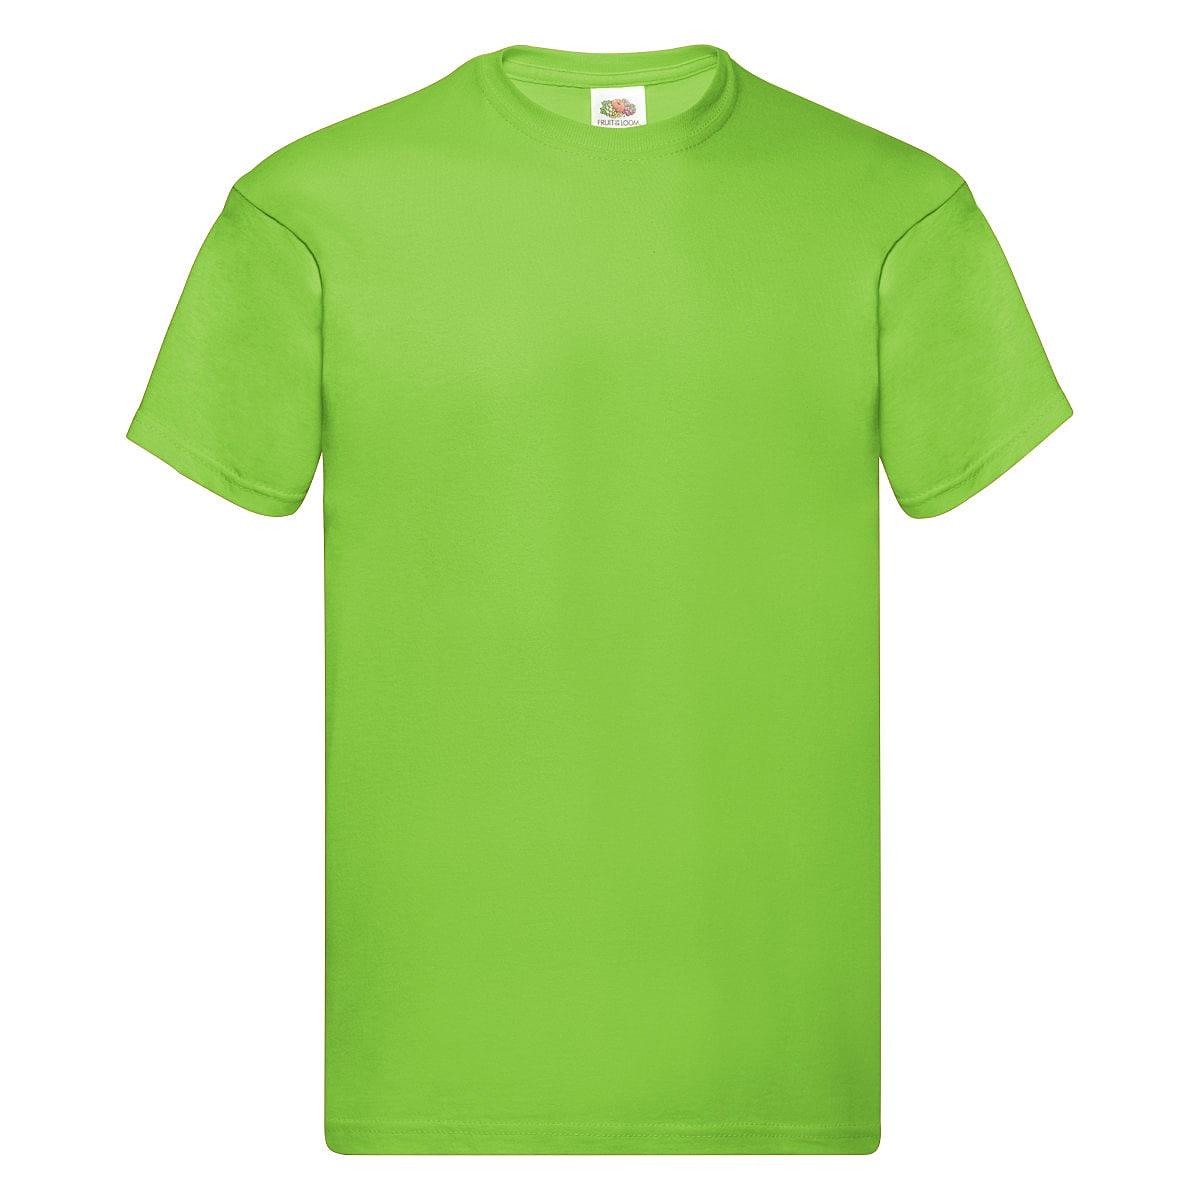 Fruit Of The Loom Original Full Cut T-Shirt in Lime (Product Code: 61082)